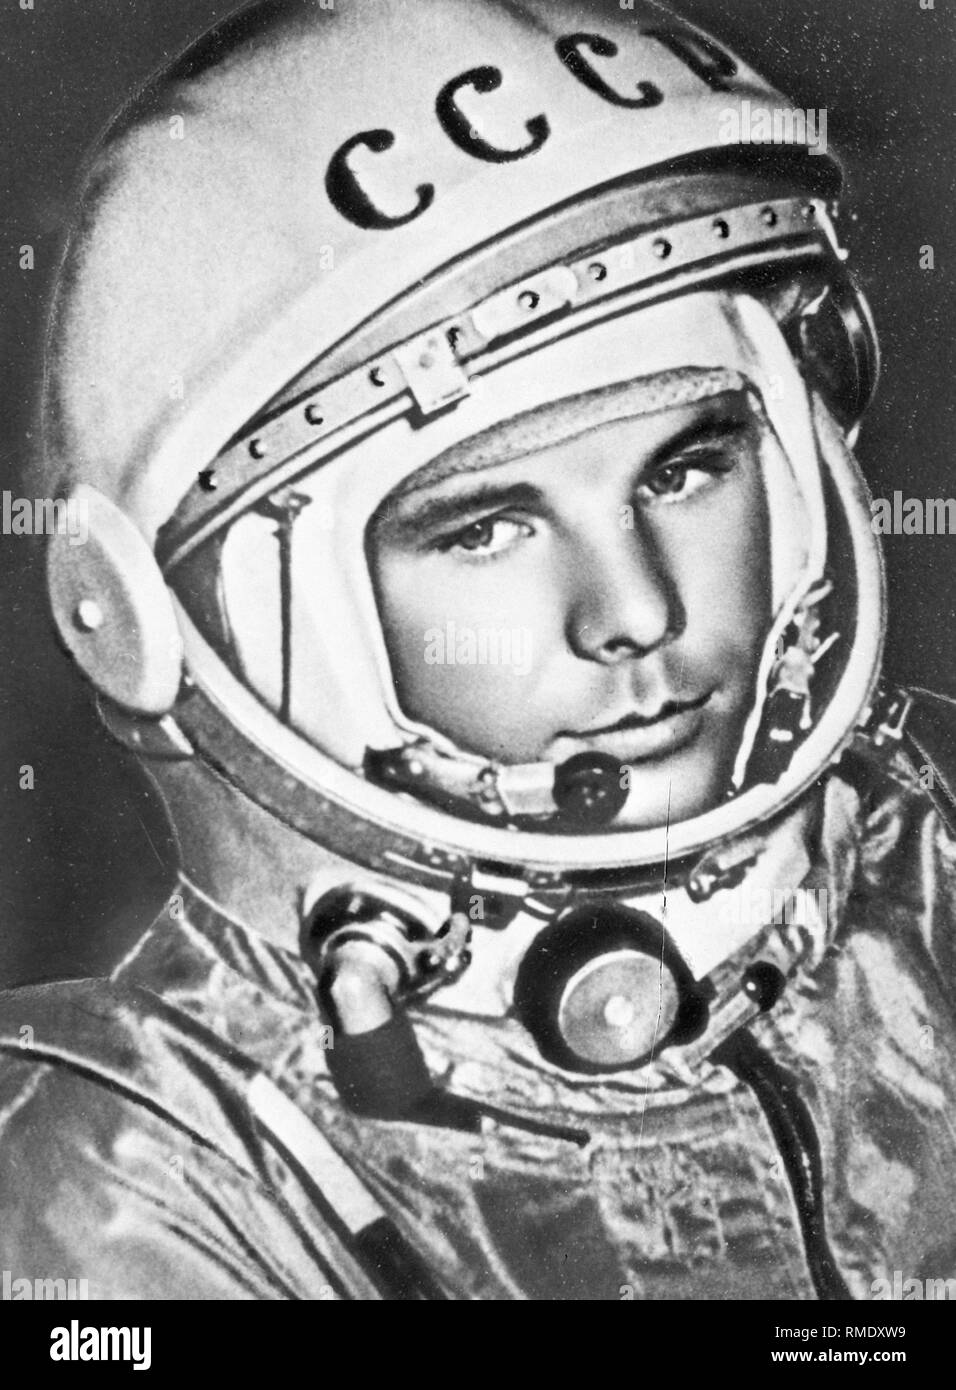 The cosmonaut Yuri Gagarin (1934-1968), the first human in outer space. Photograph Stock Photo